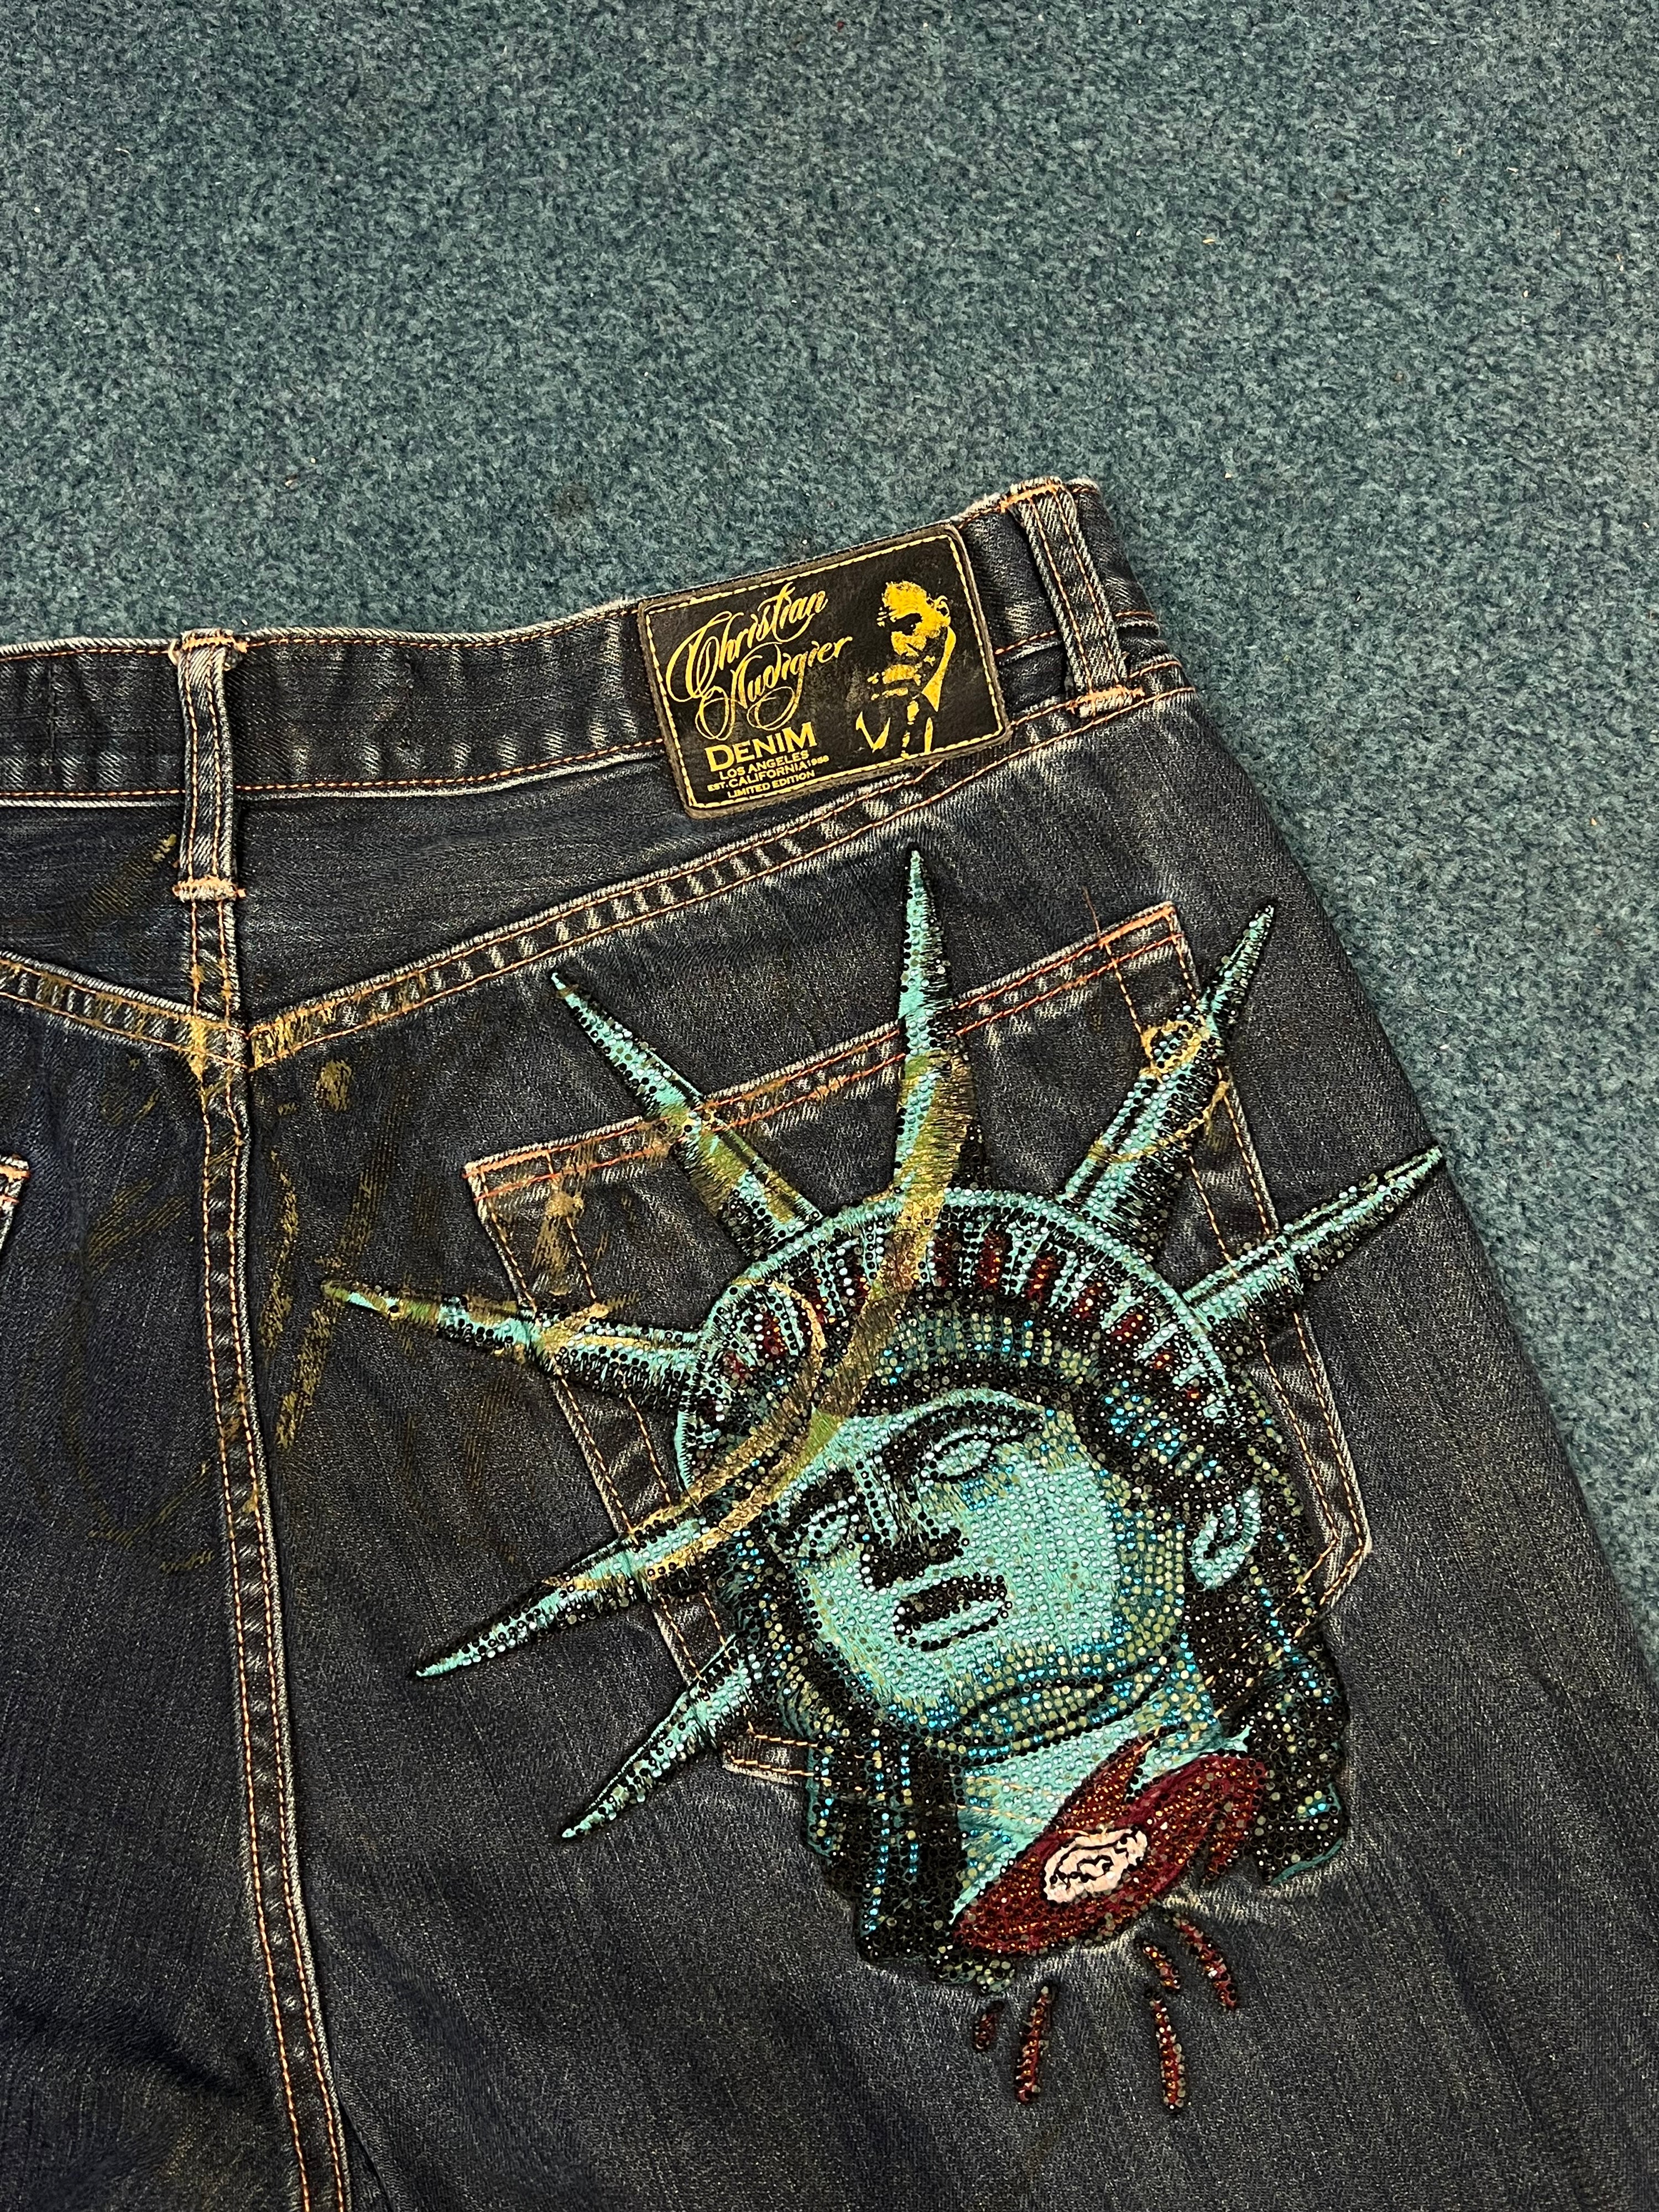 Early 2000s Christian Audigier Liberty Statue (not Ed Hardy) Flared Denim Trousers (34)